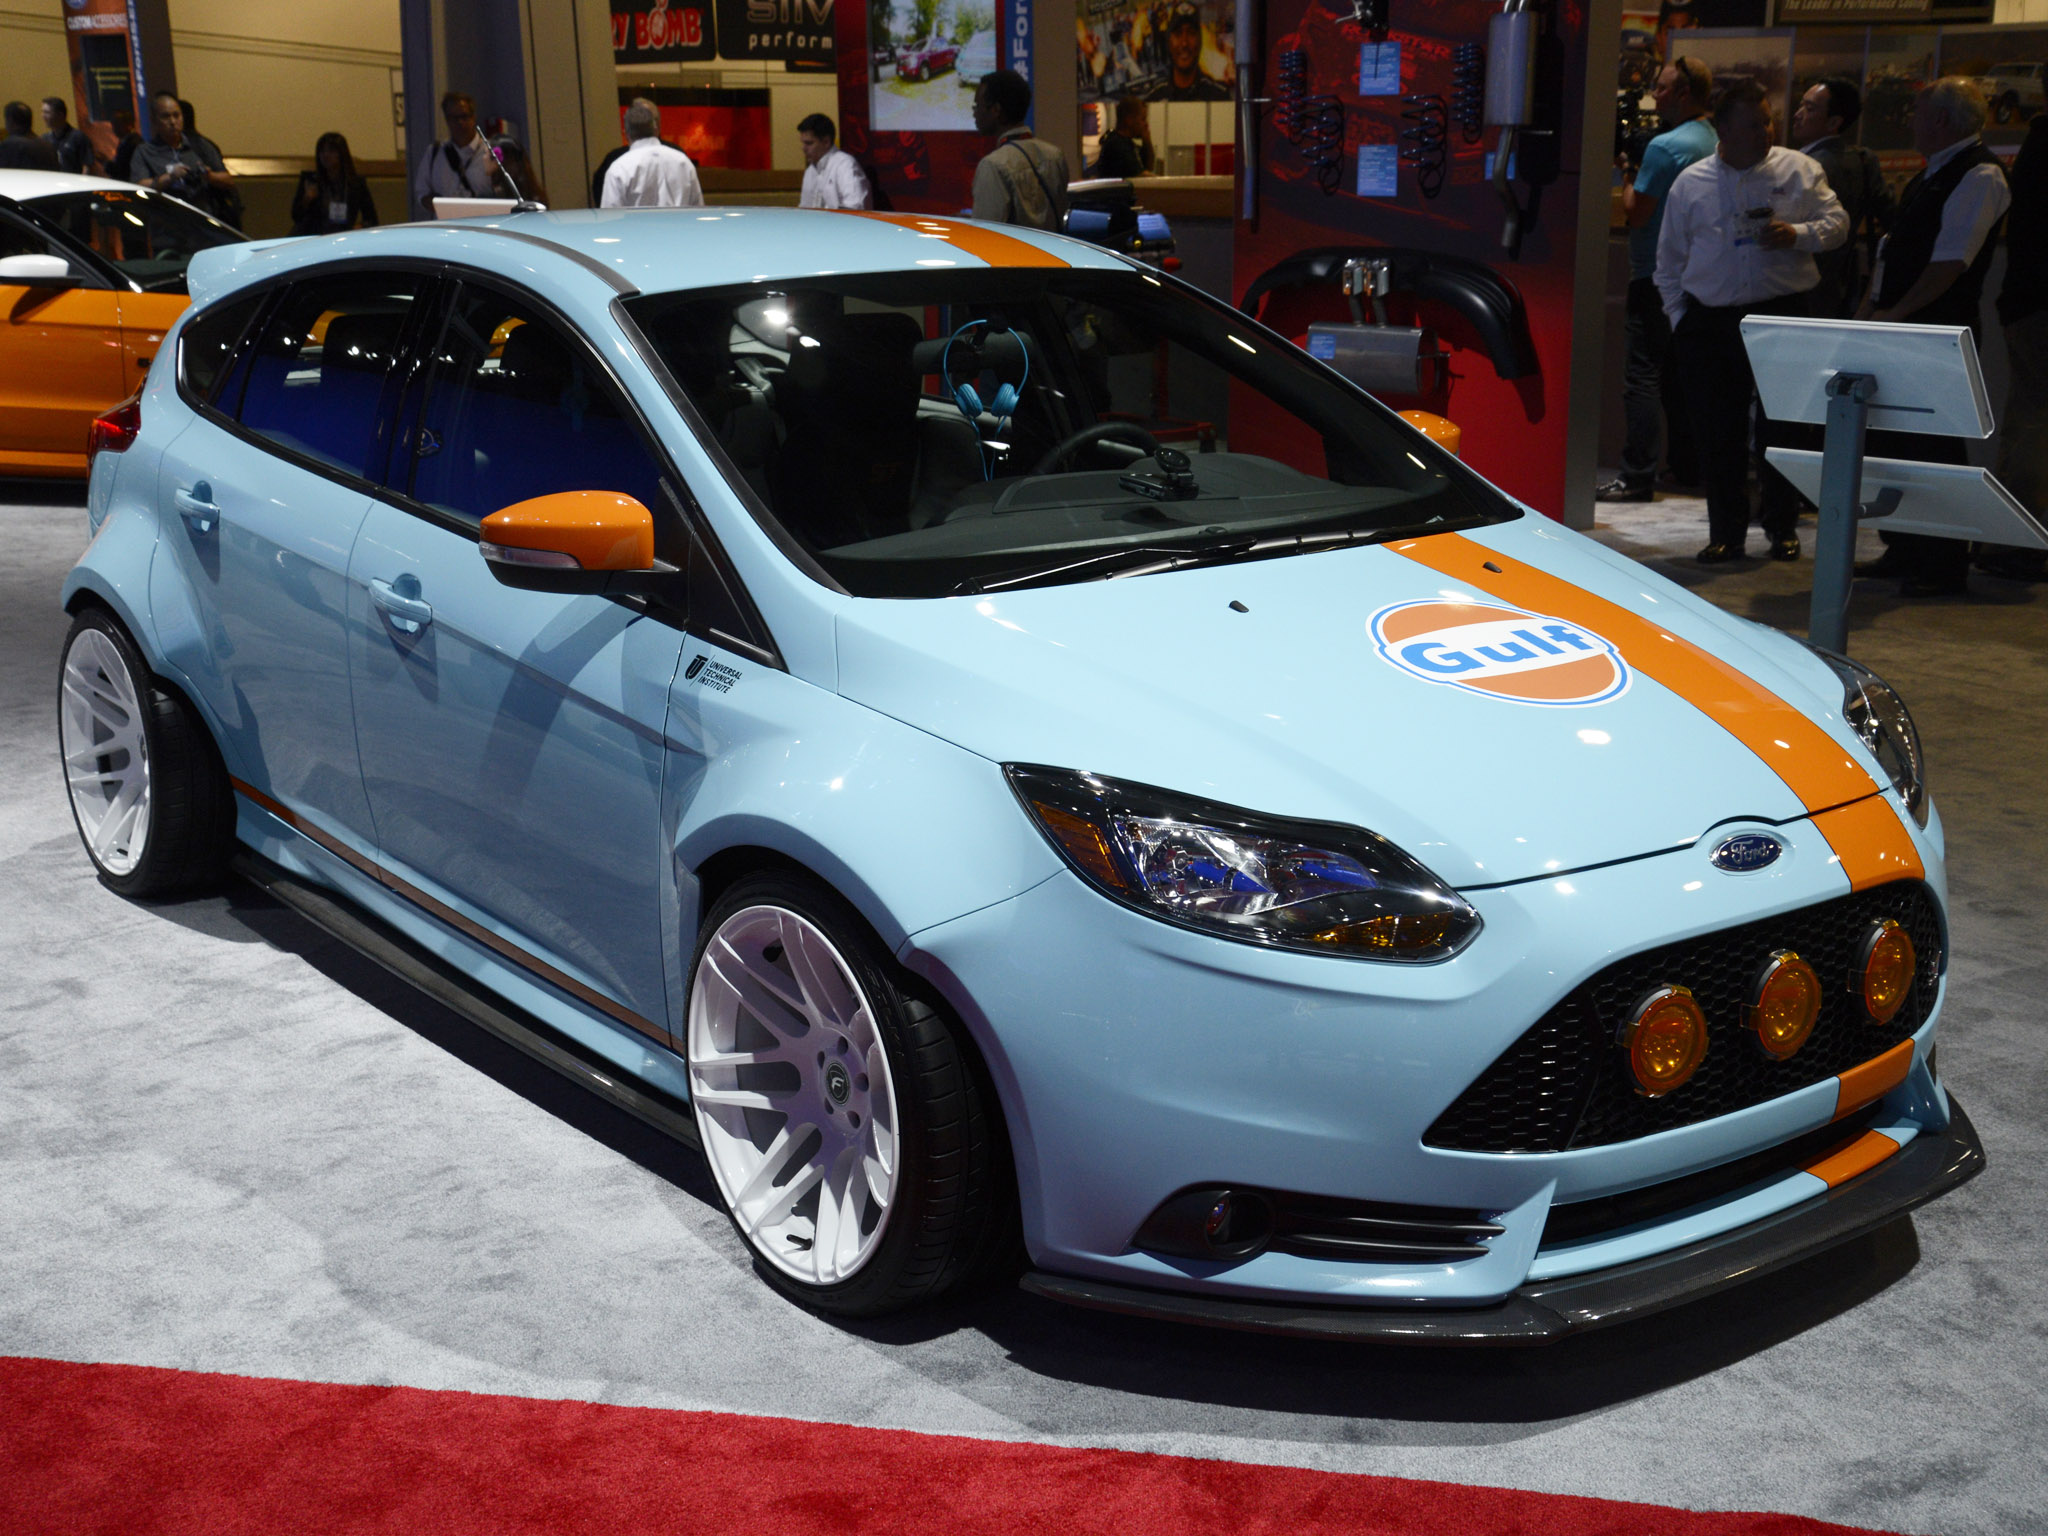 2013, Ford, Focus, St, Gulf, Racing, Race, Tuning, S t Wallpaper